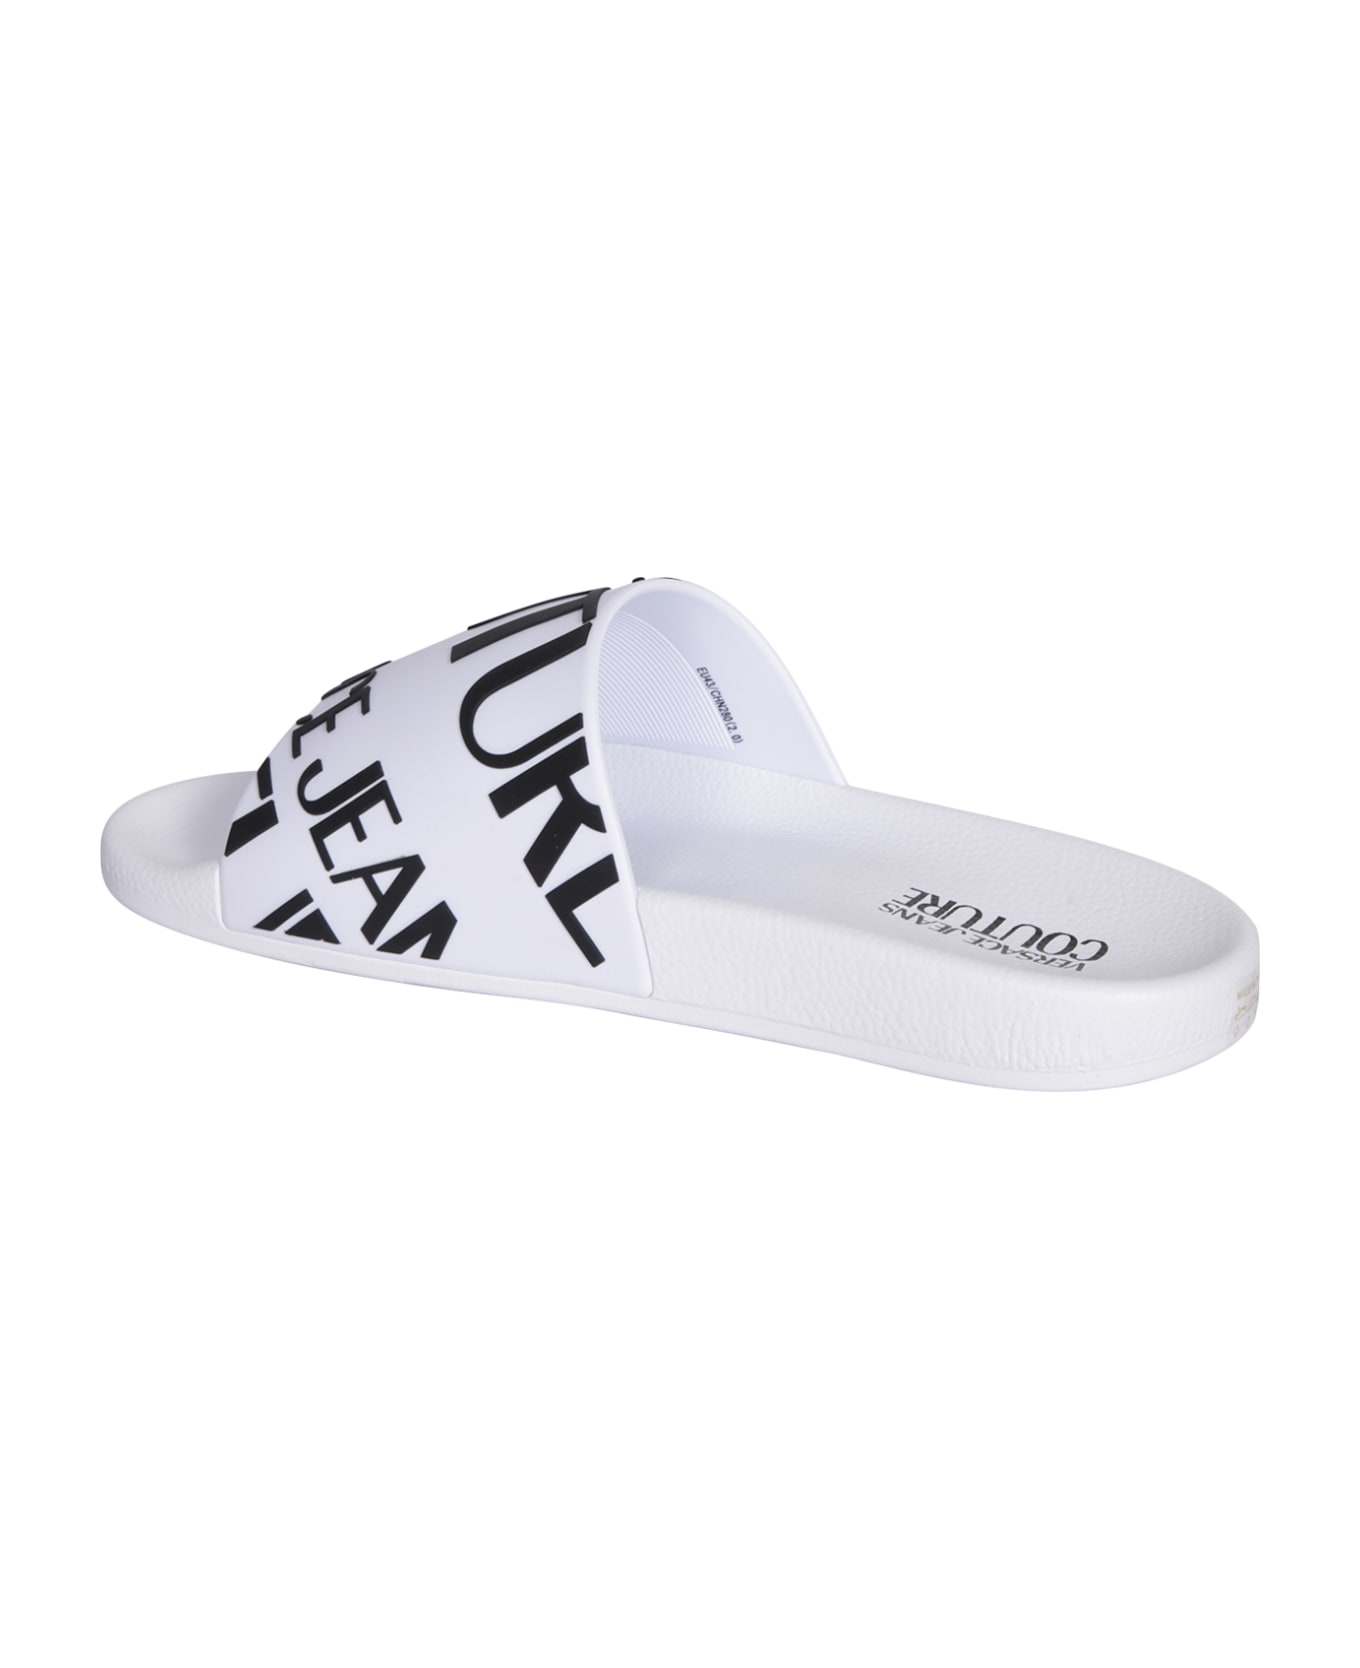 Versace Jeans Couture Shoes - White その他各種シューズ